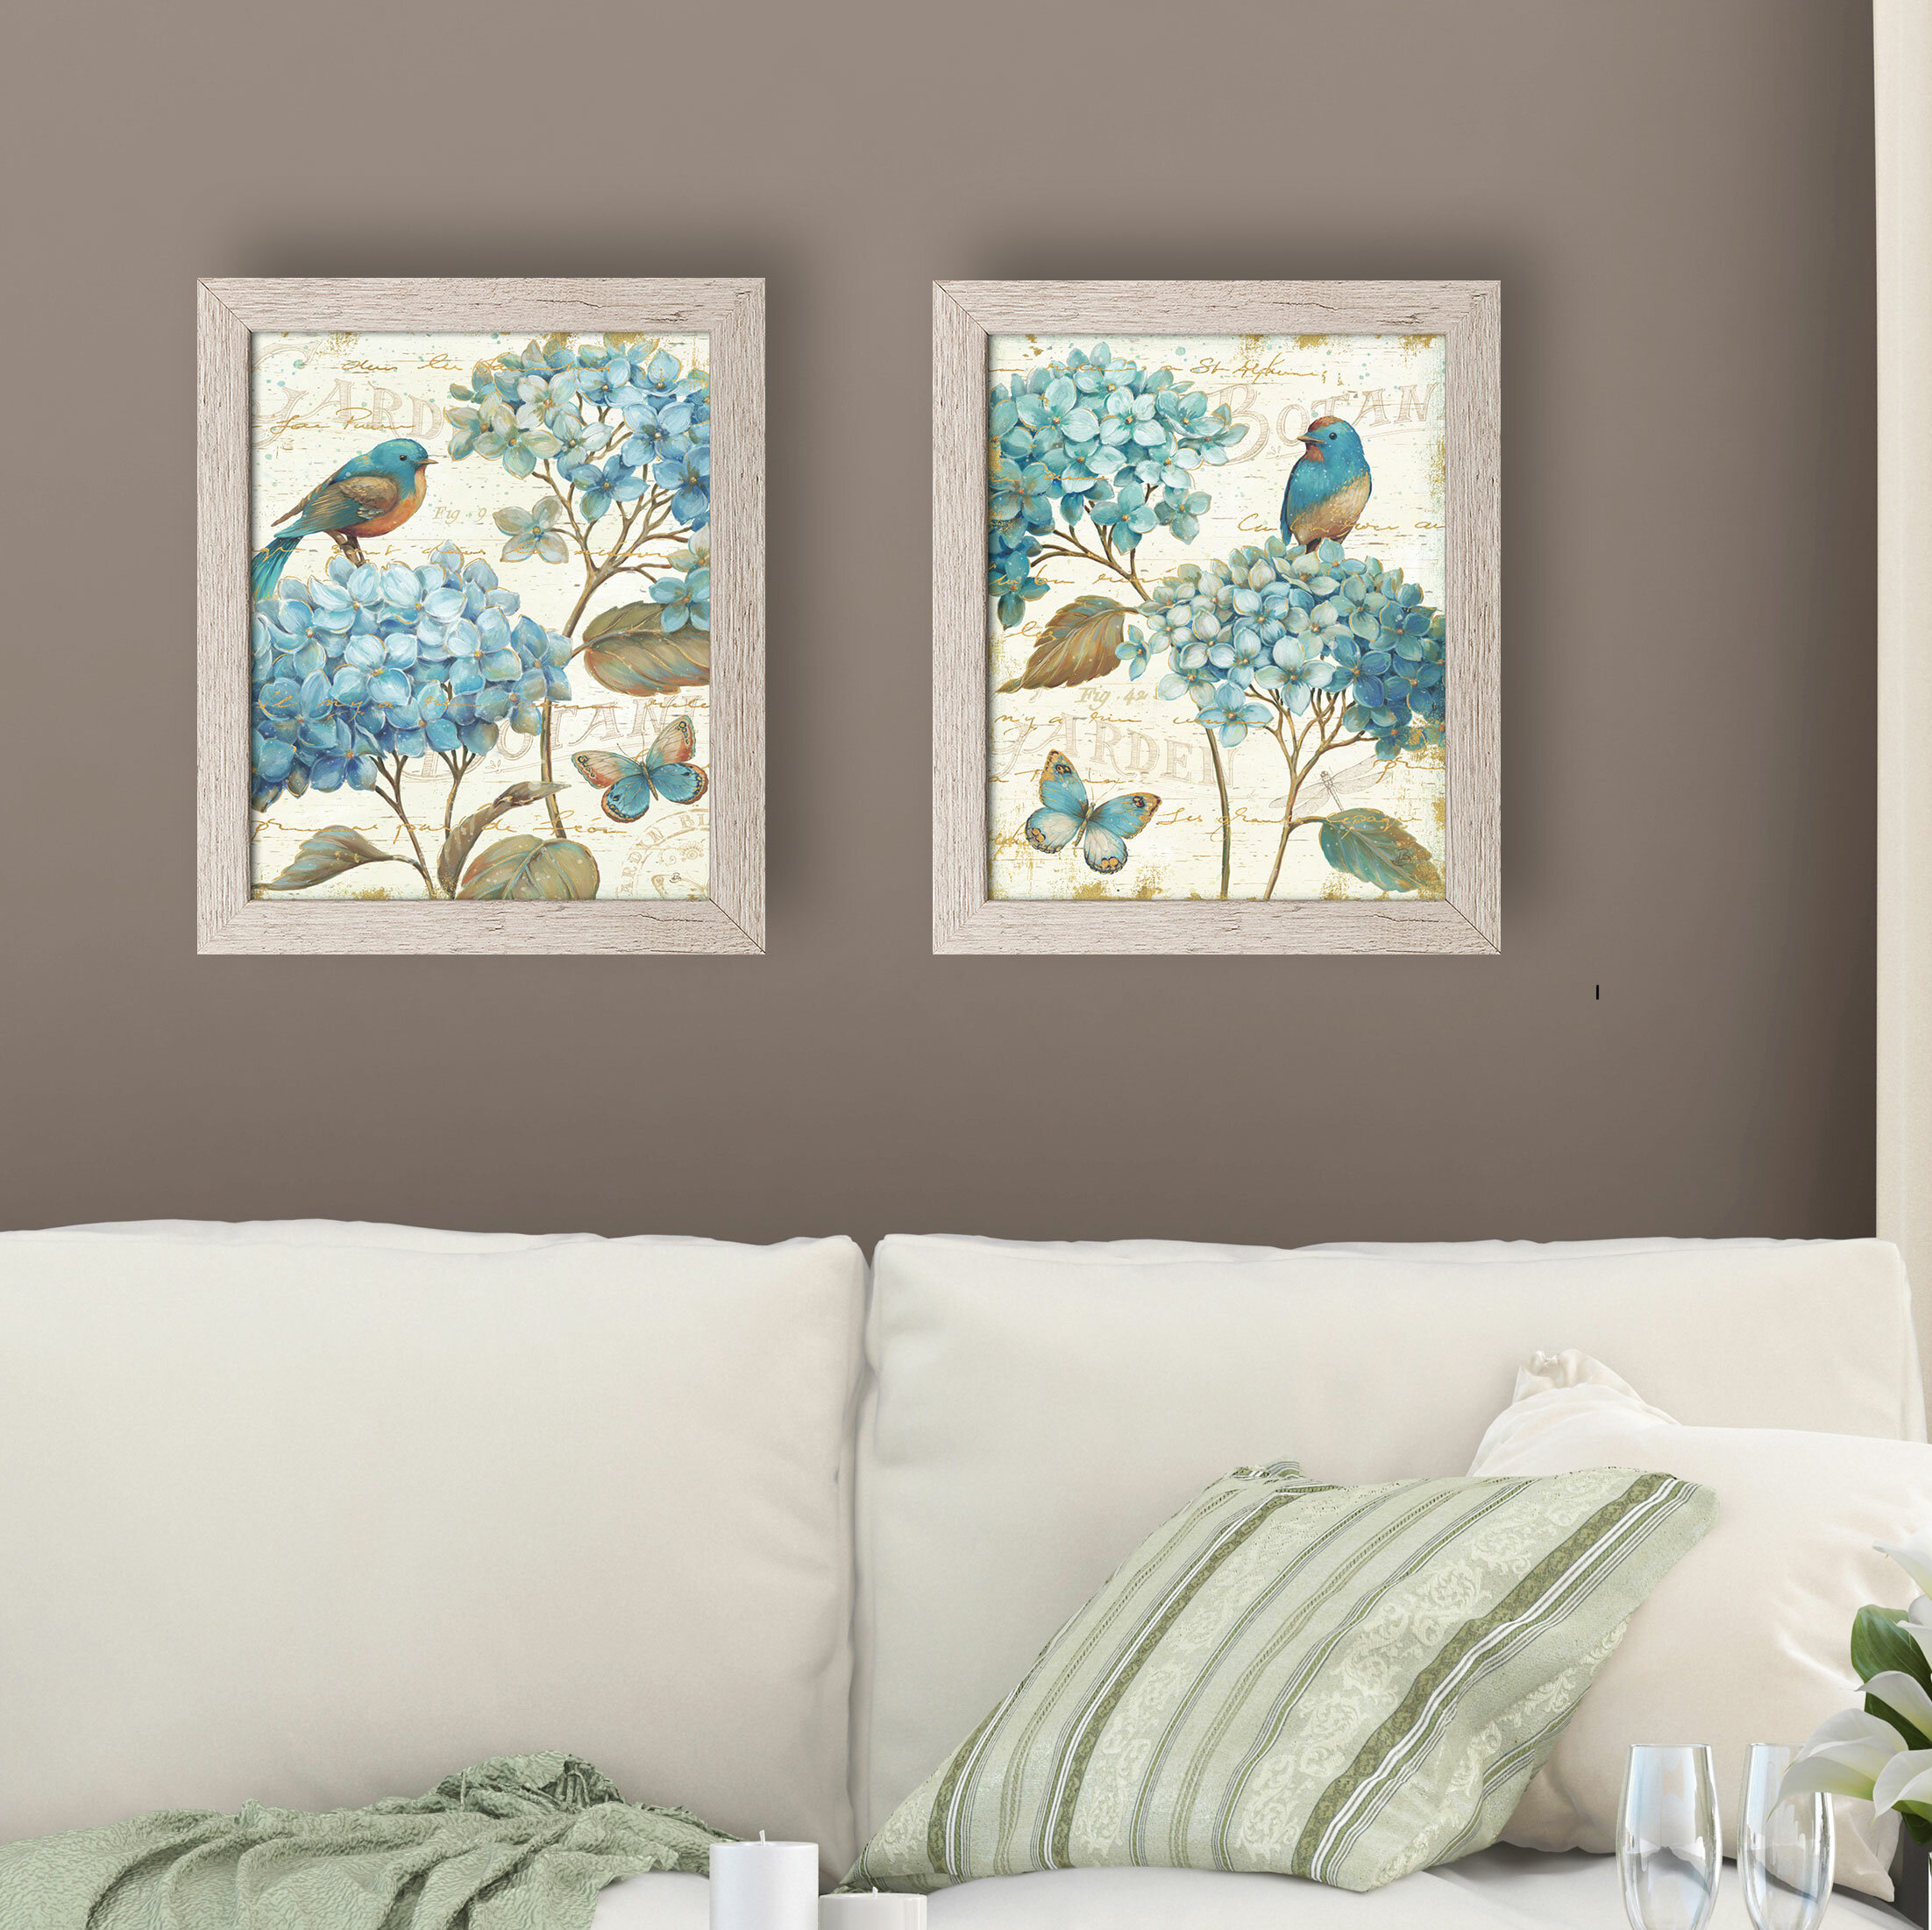 Darby Home Co Gorgeous Teal And Cream Watercolor-Style Hydrangea Florals,  Birds And Butterfly by Daphne Brissonnet Piece Single Picture Frame  Graphic Art  Reviews Wayfair Canada